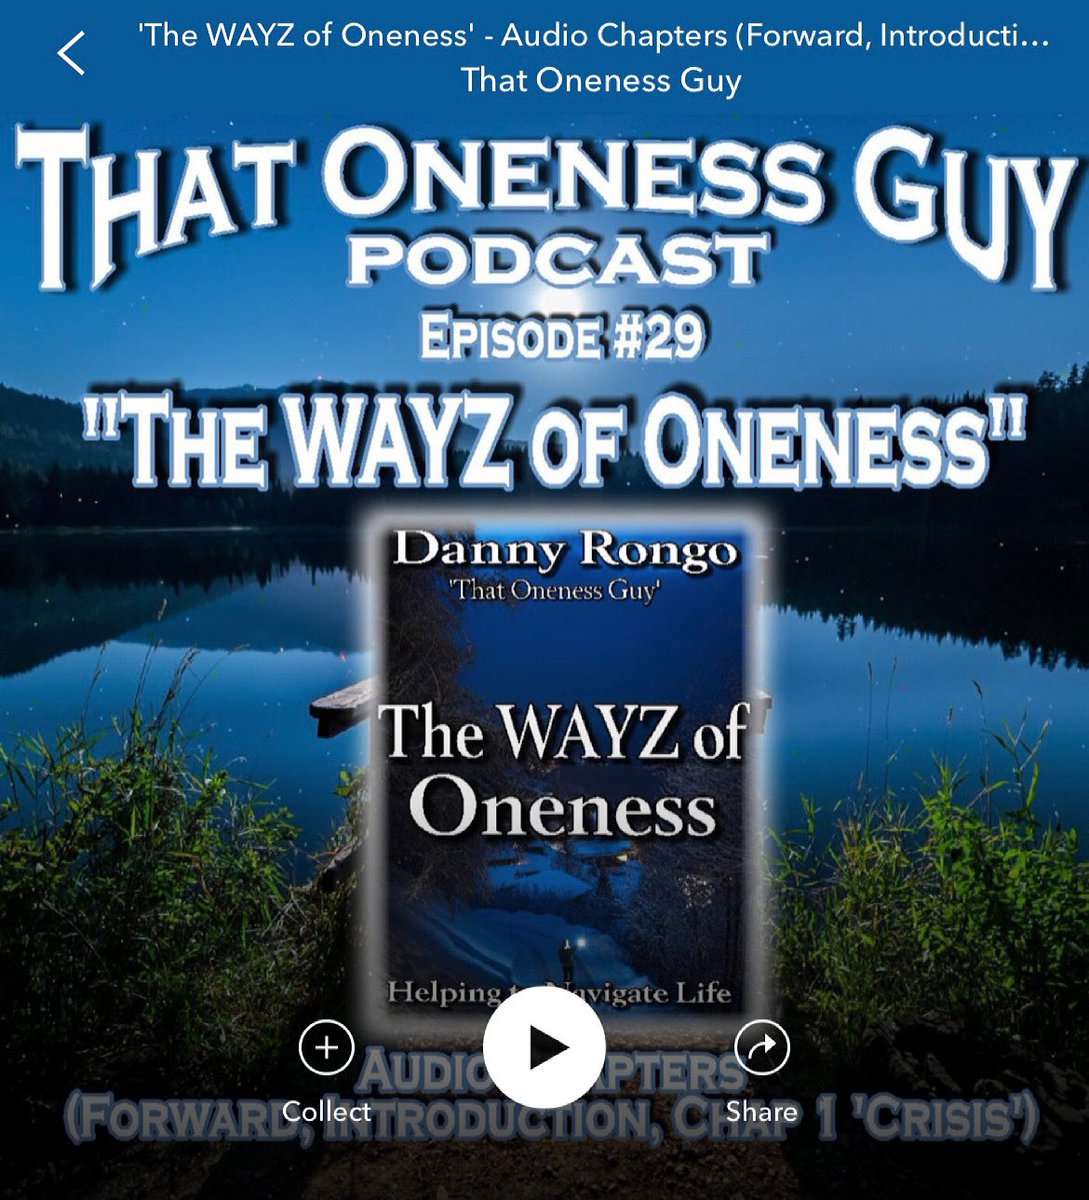 For those who rather have their books of choice be read to them, this podcast is for you!

#podcast #podcaster #podcastlife #PodcastRecommendations #authorlife #authorreading #authoreadingseries #Oneness #newbook #spiritualguidance #inspirationalguidebook #thewayzofoneness